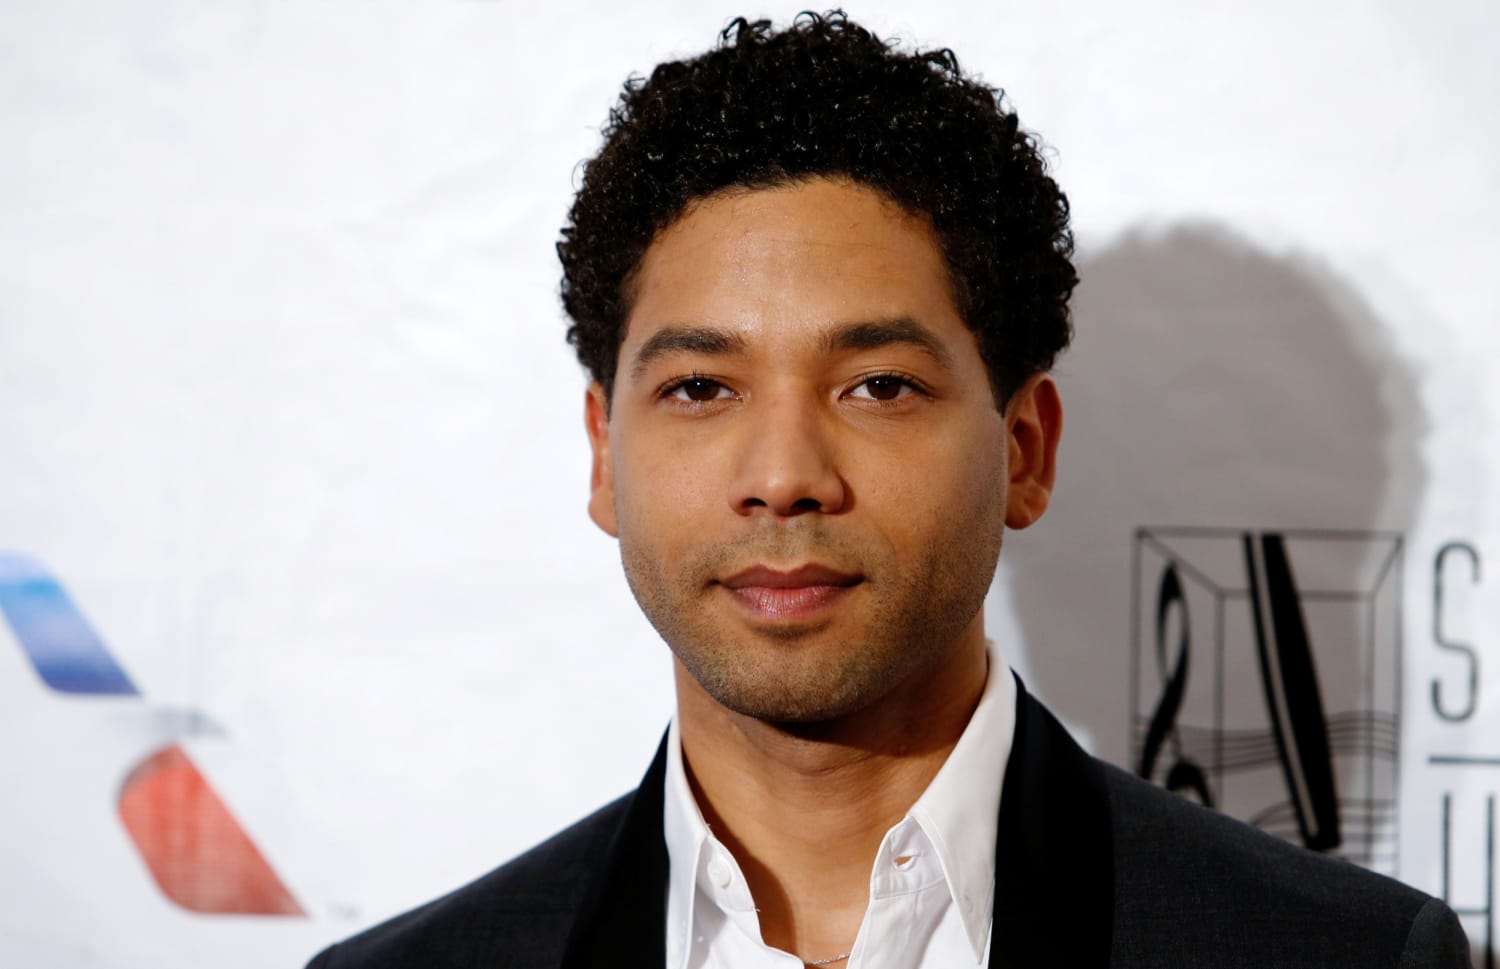 Fox responds to report that Jussie Smollett's scenes on 'Empire' reduced amid ...2500 x 1615